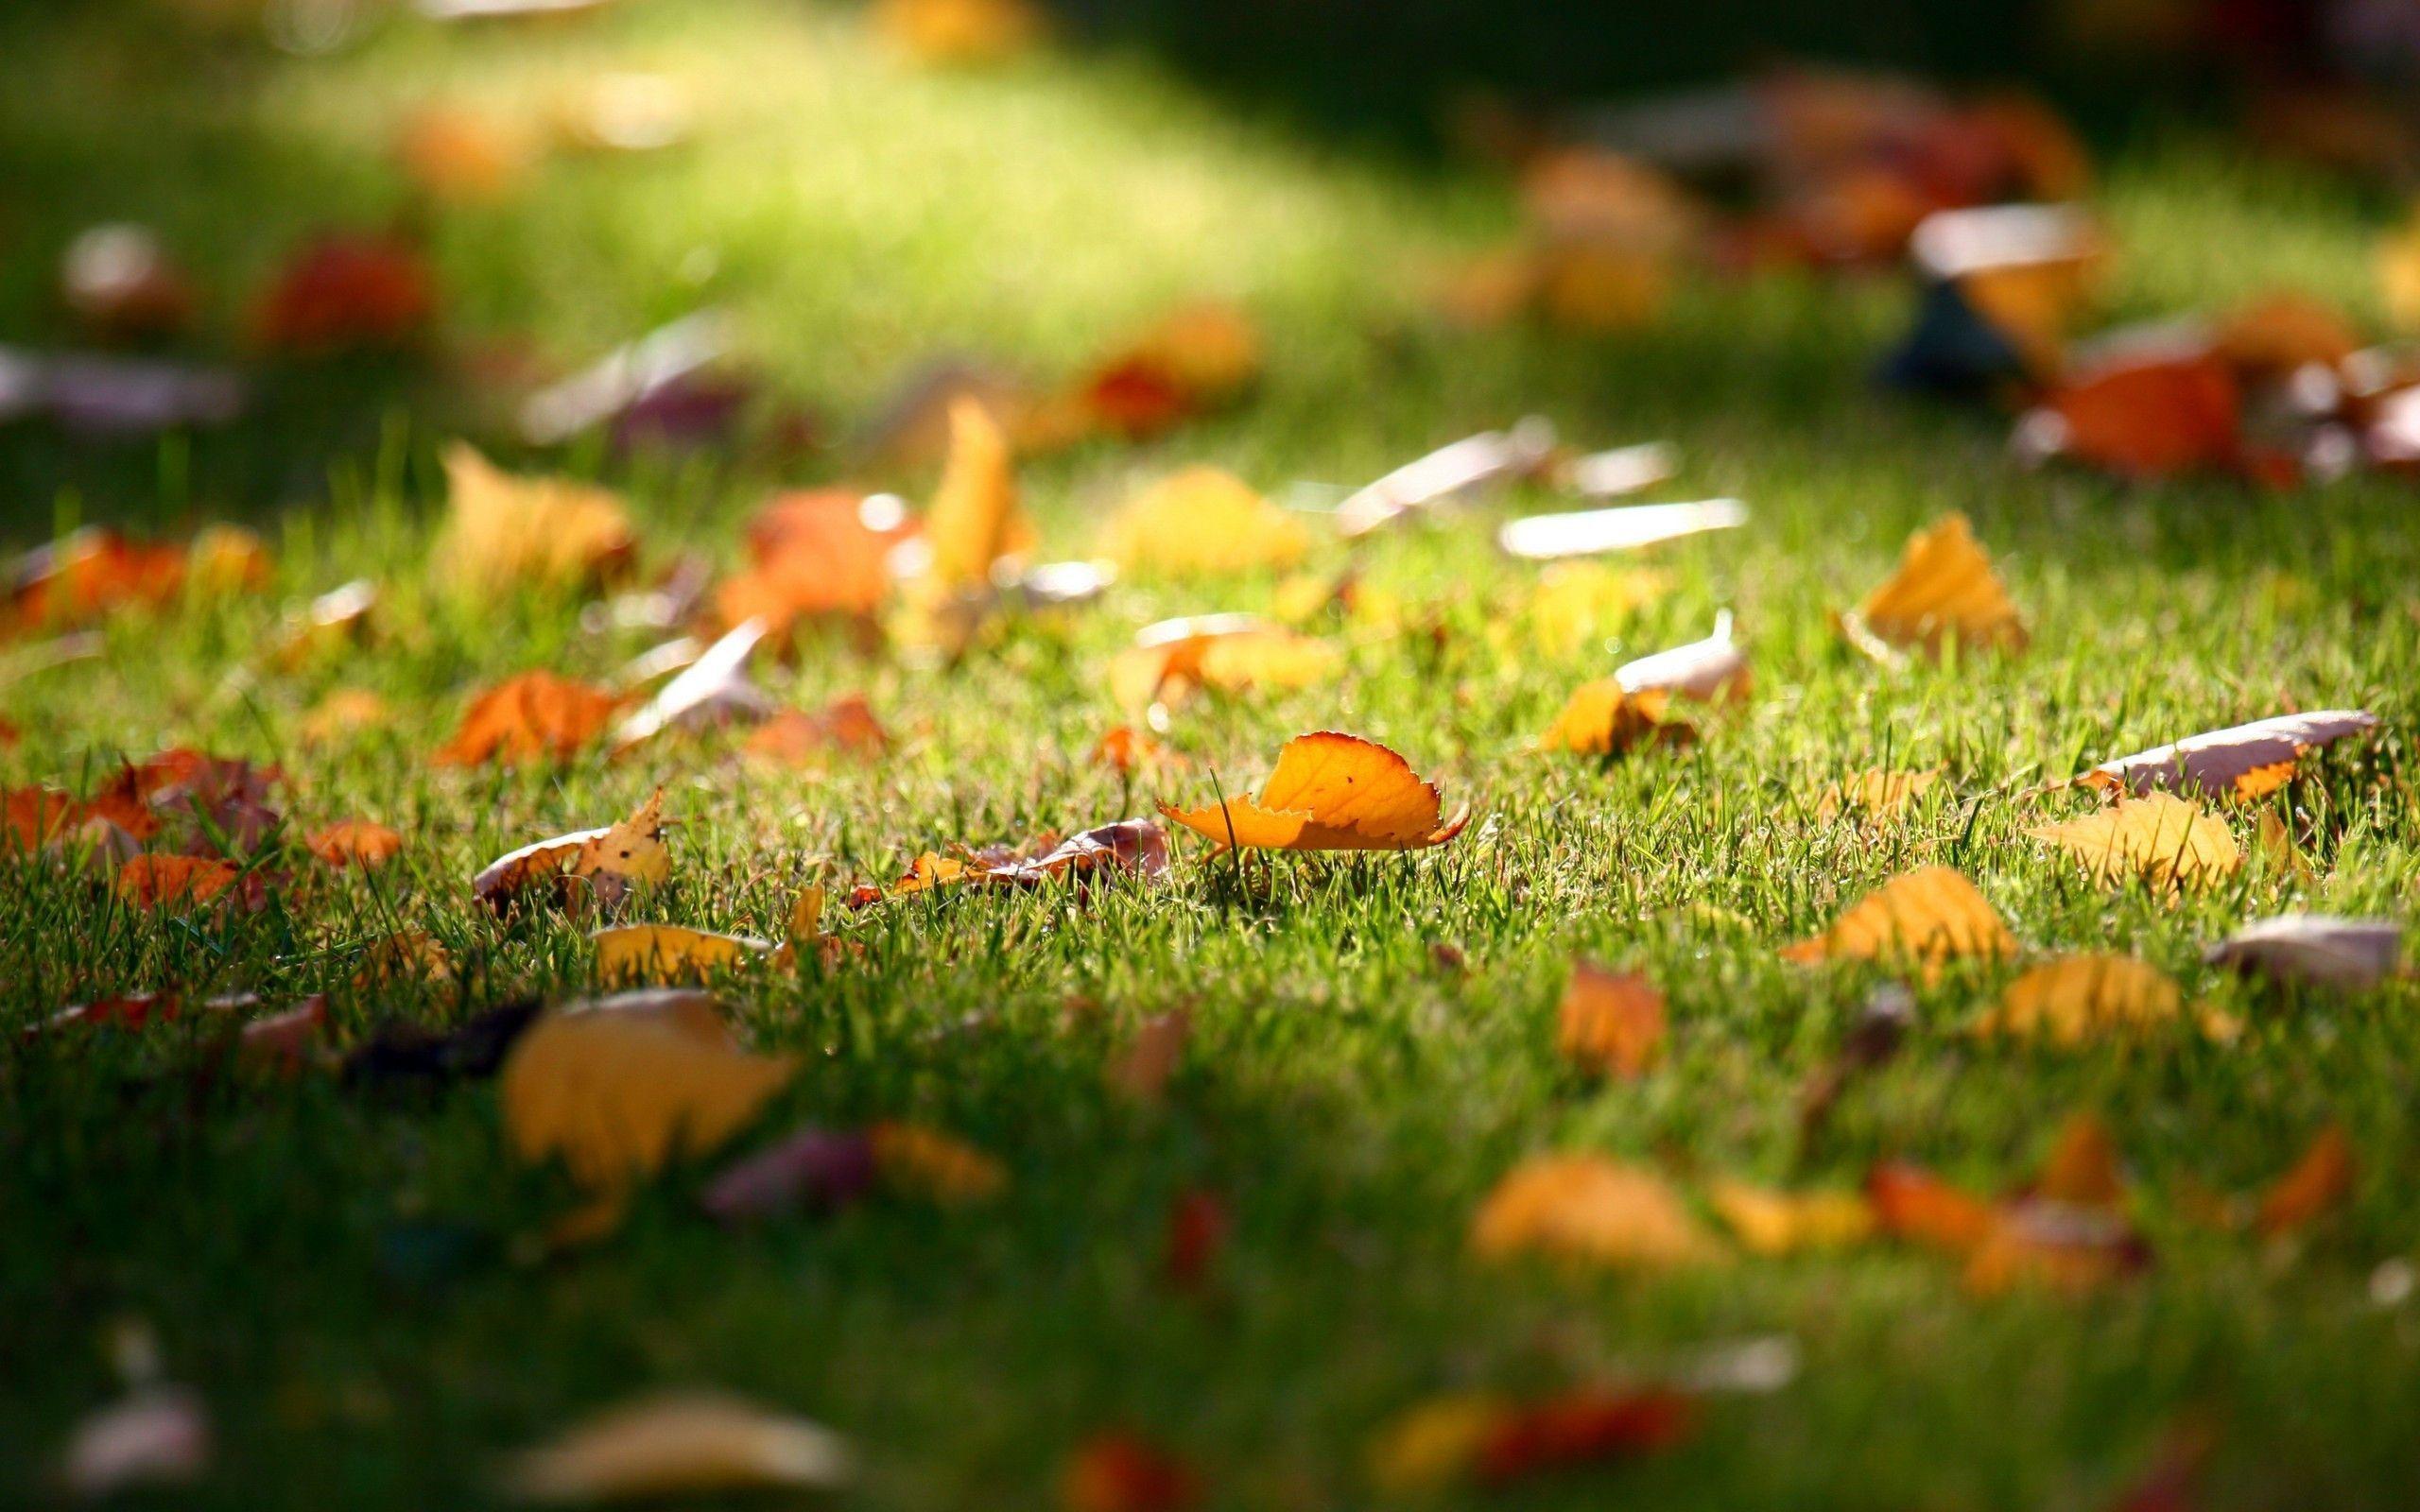 Leaves on grass wallpaper and image, picture, photo